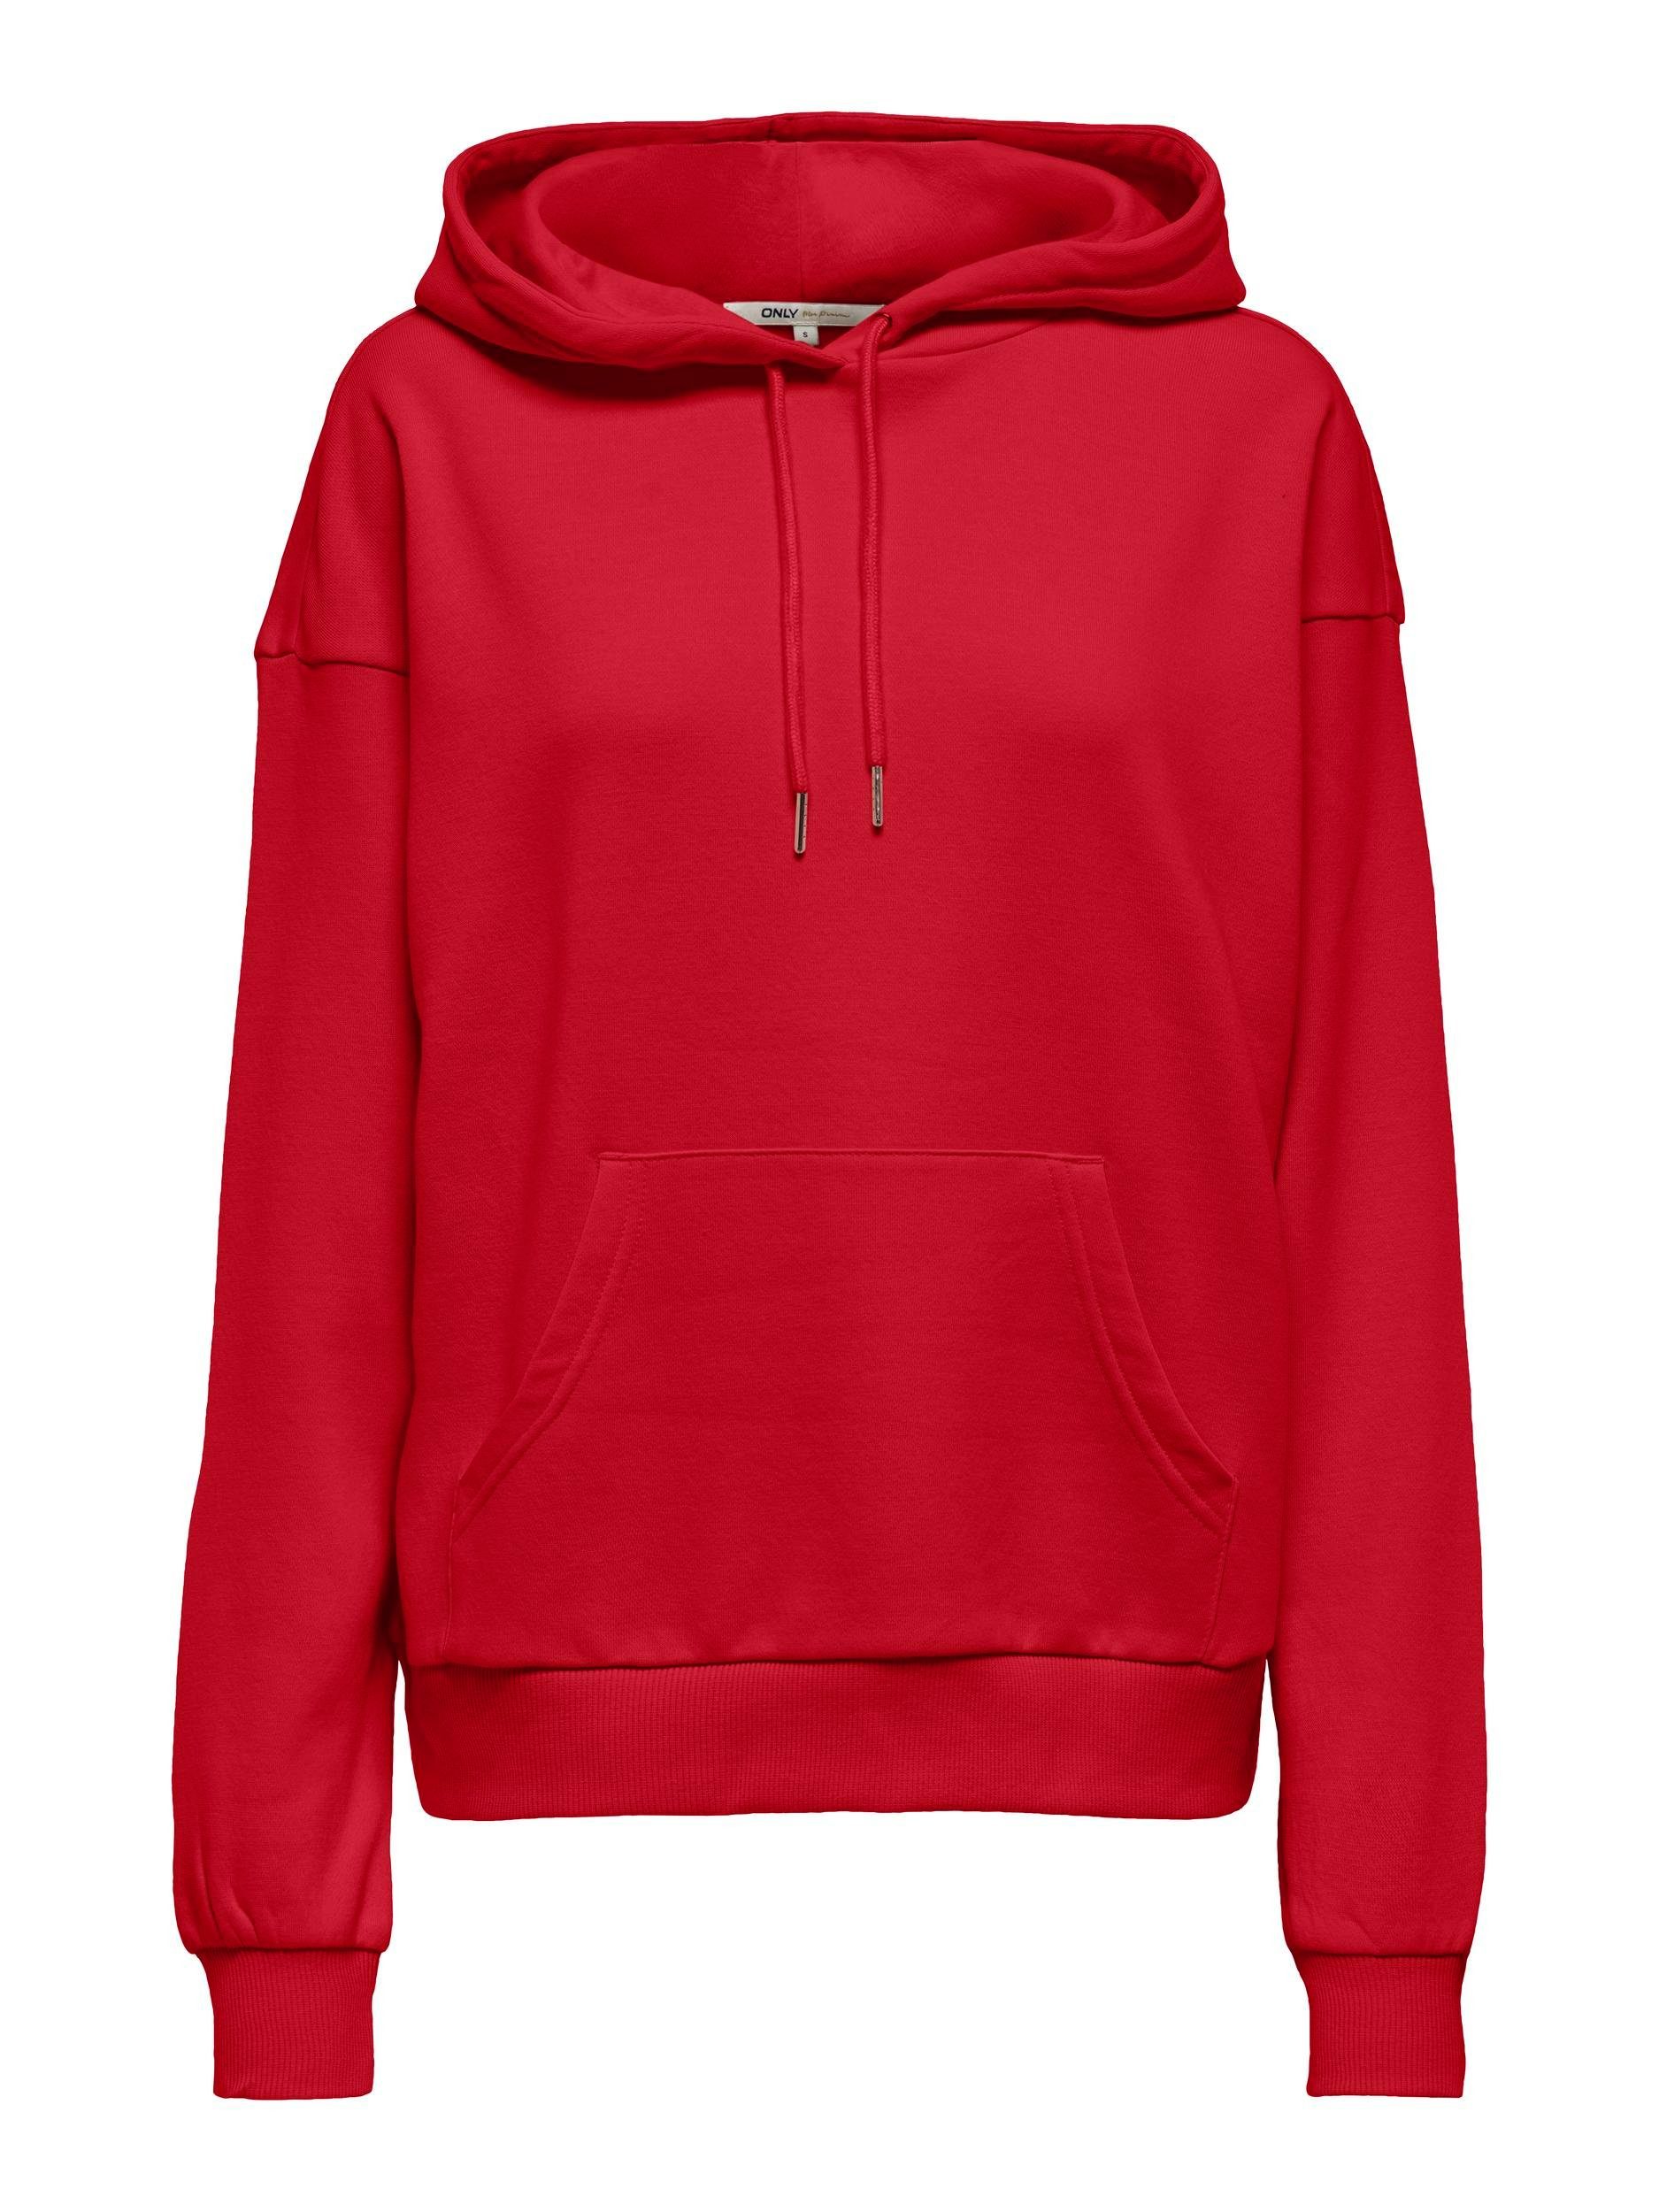 ONLY Hoodie EVERY Red Equestrian SWEAT PNT ONLJODA HOODIE